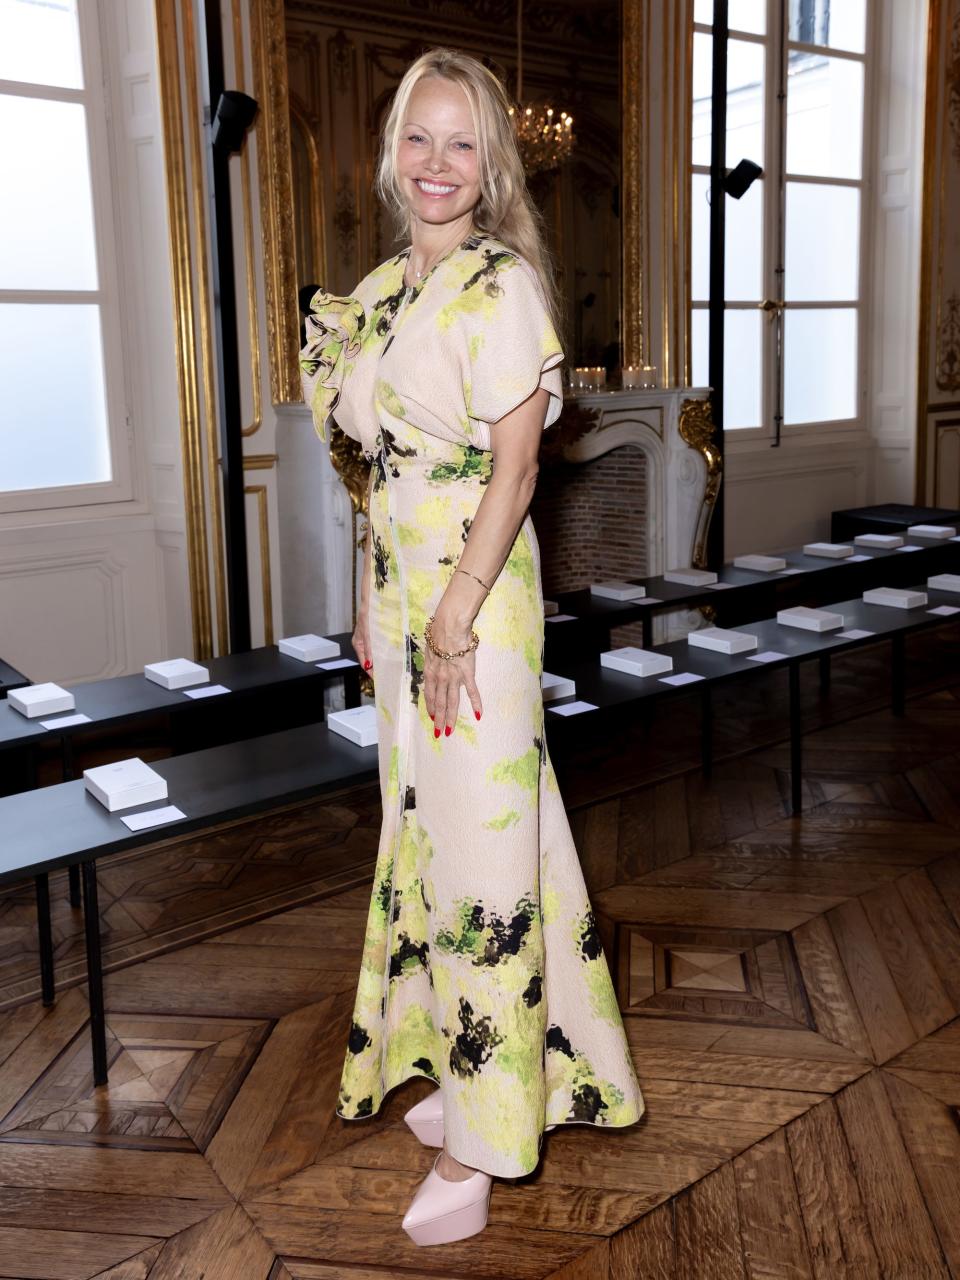 Pamela Anderson went makeupfree at Paris Fashion Week and stole the show